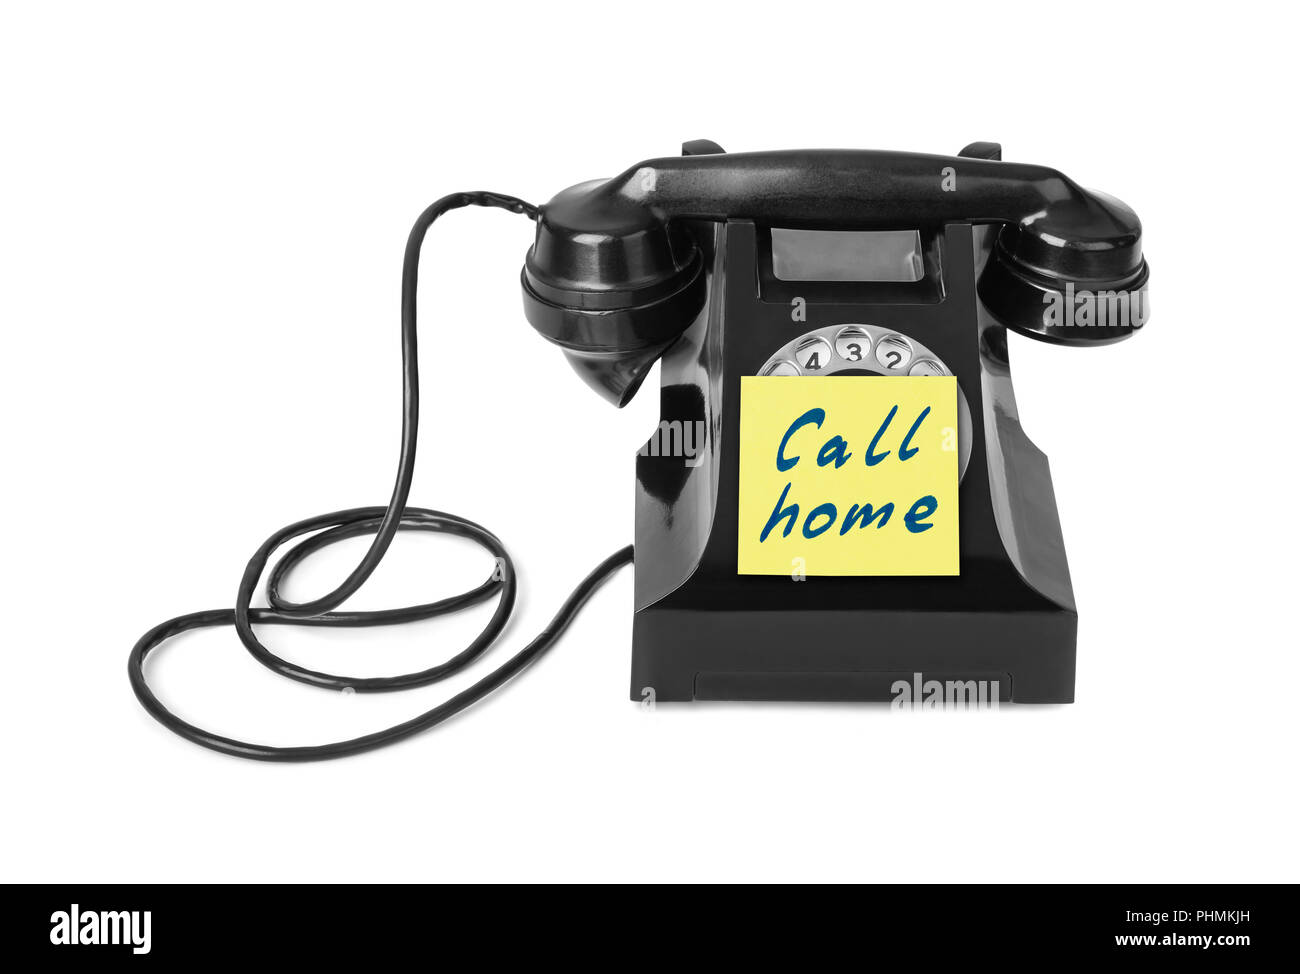 Vintage telephone and paper Call home Stock Photo